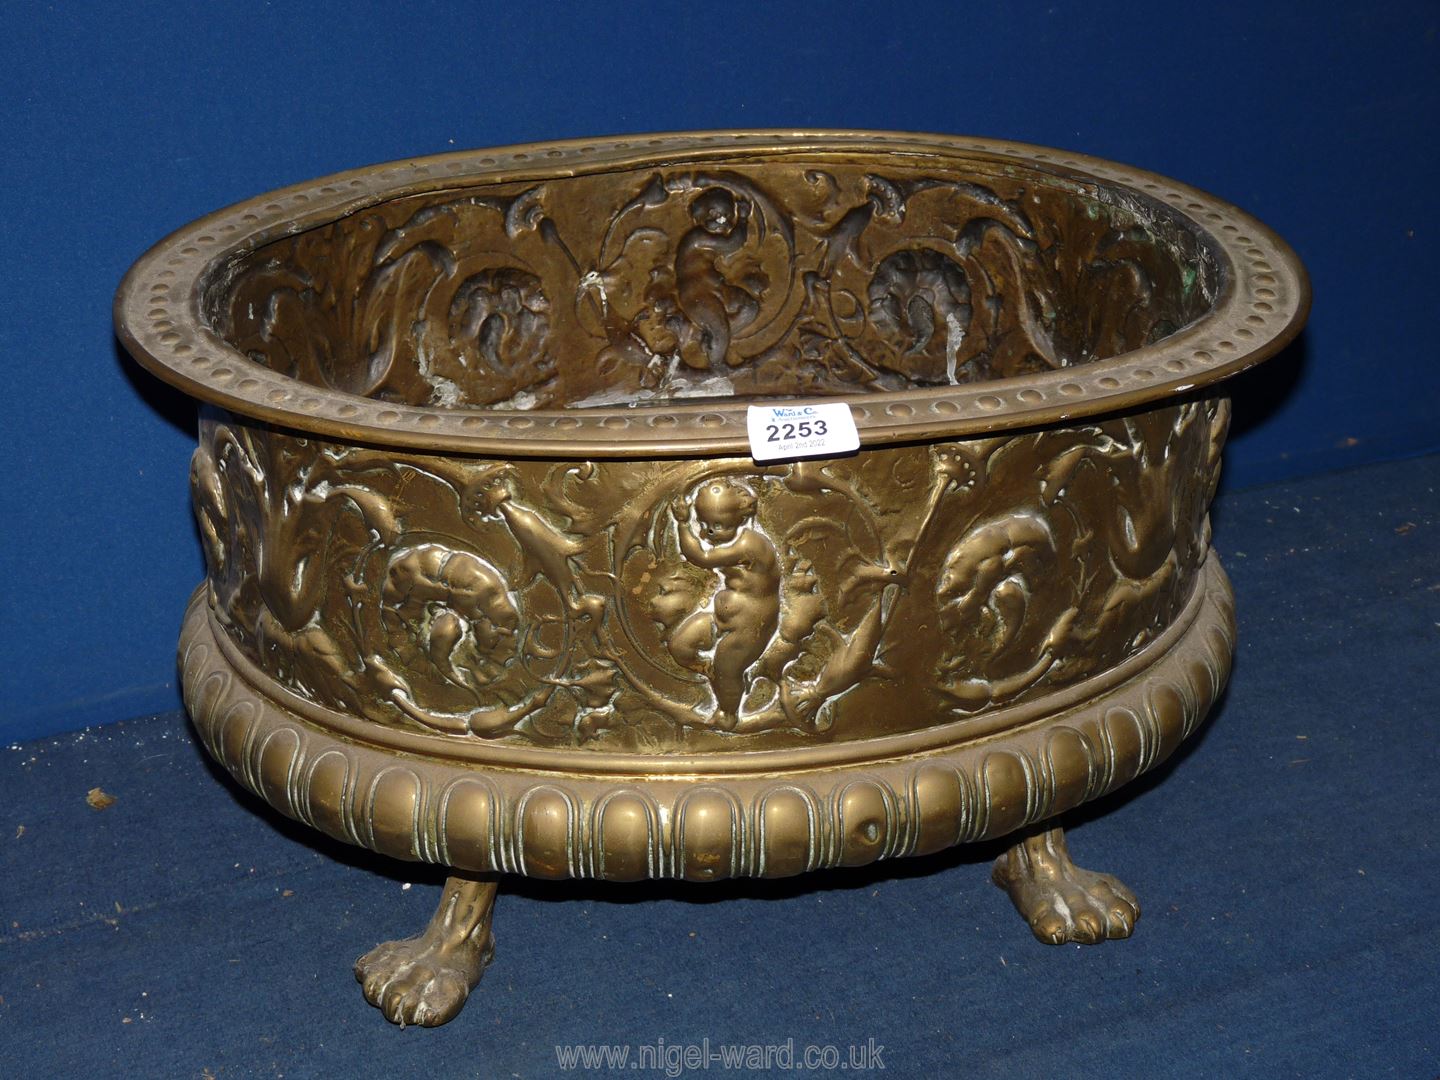 A brass Jardiniere with images in relief, standing on paw feet, 20'' x 16'' x 11'' tall.